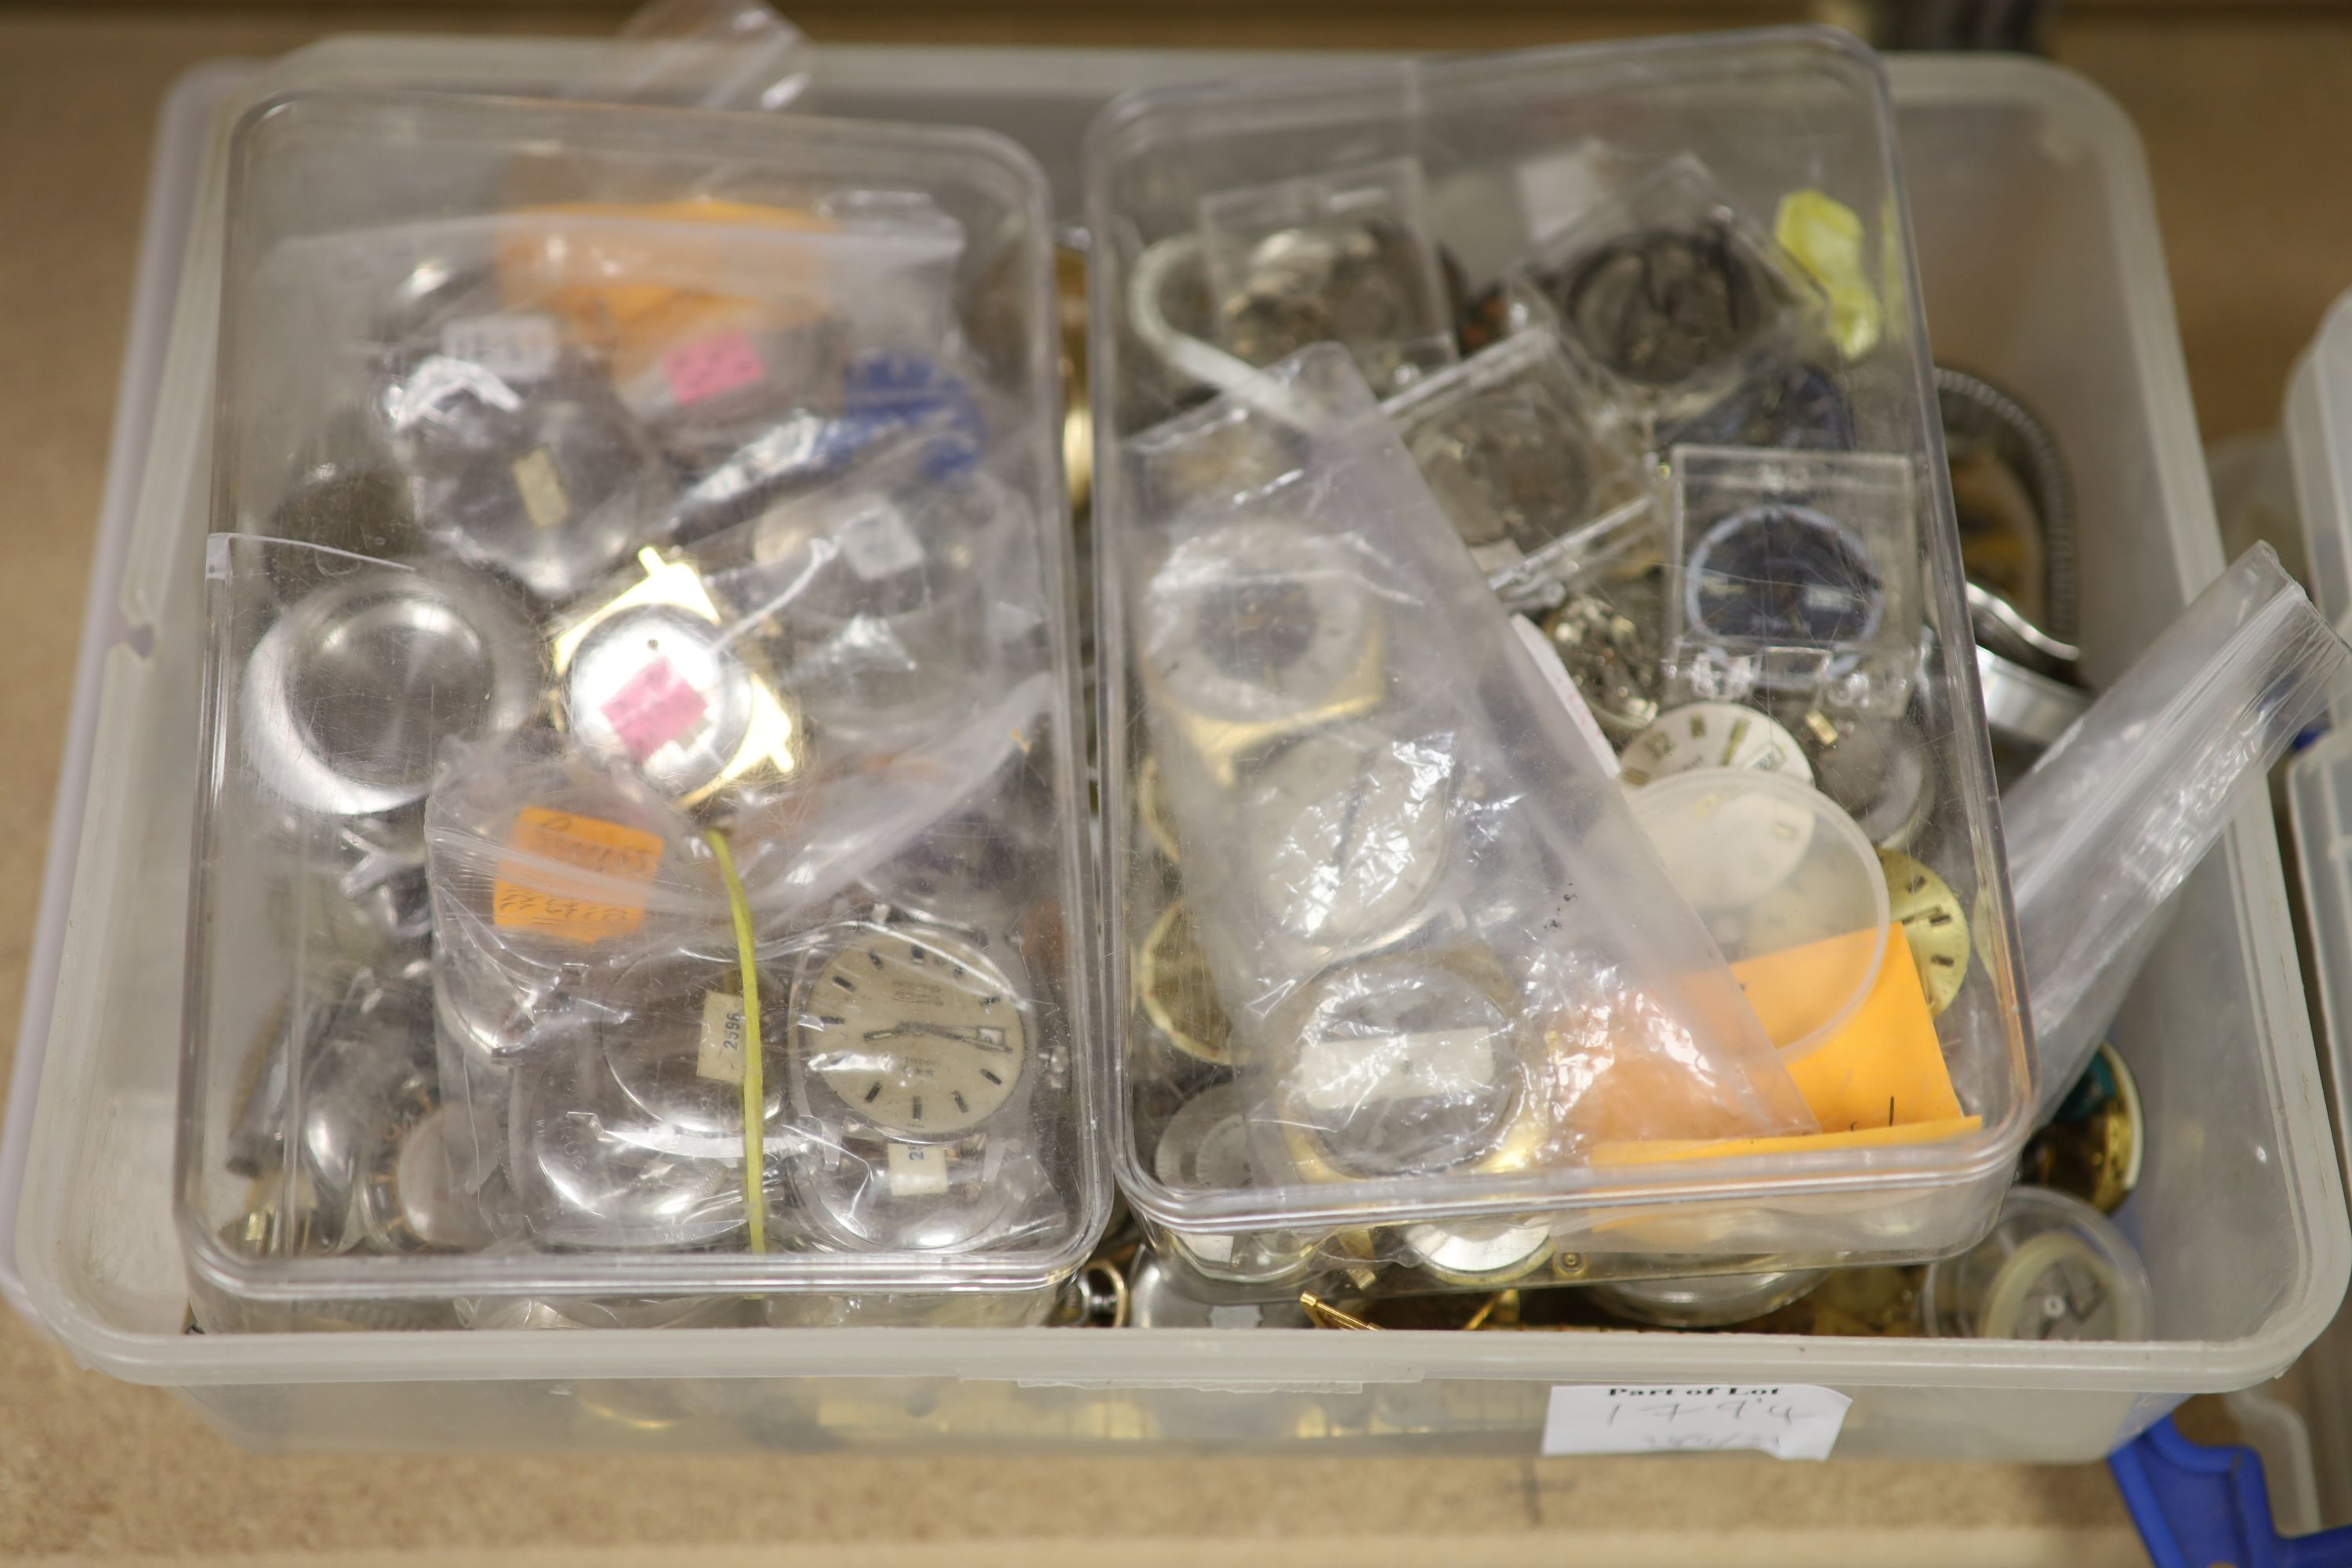 A large quantity of mostly Swiss wrist and pocket watches, for repair and parts